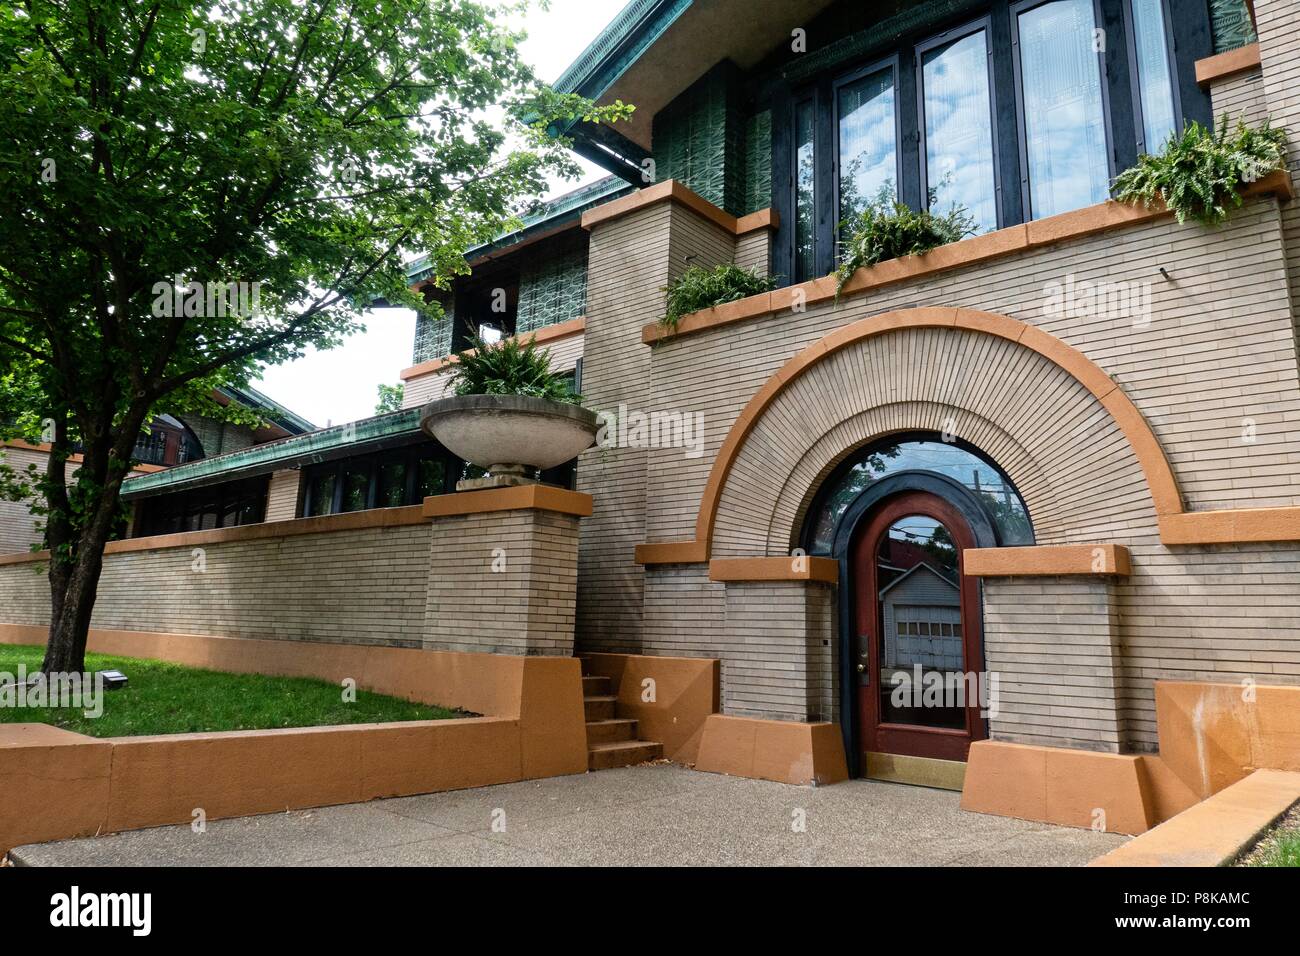 This fine example of Frank Lloyd Wright prairie style architecture was commissioned by the wealthy widow, Susan Lawrence Dana in 1902 and is a major t Stock Photo